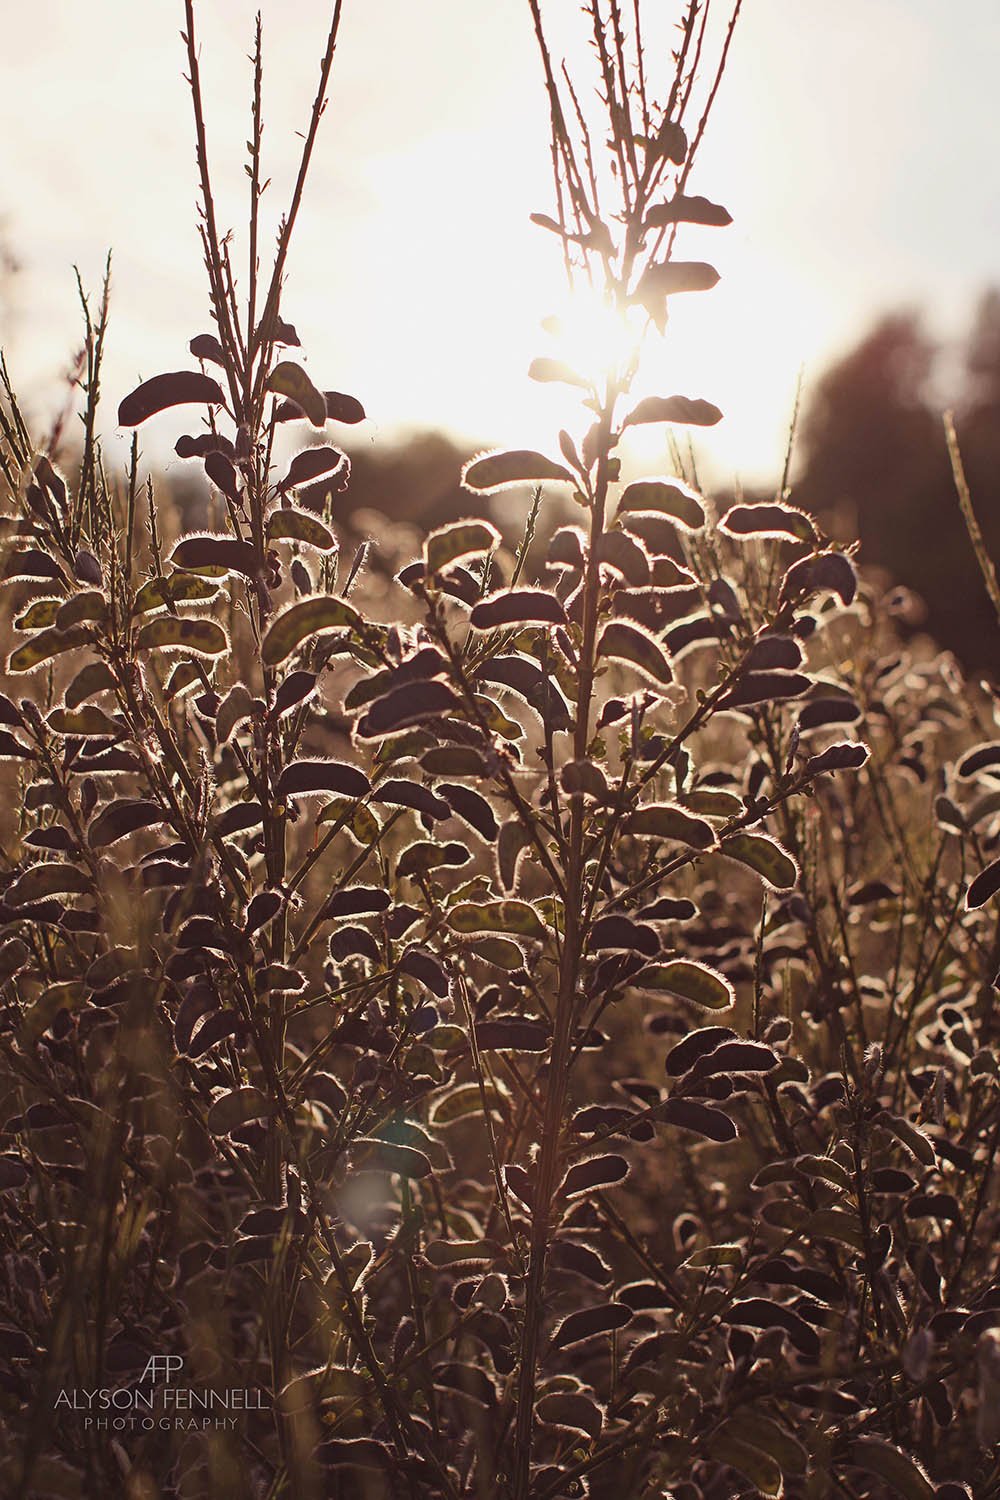 Sunlit Seed Pods